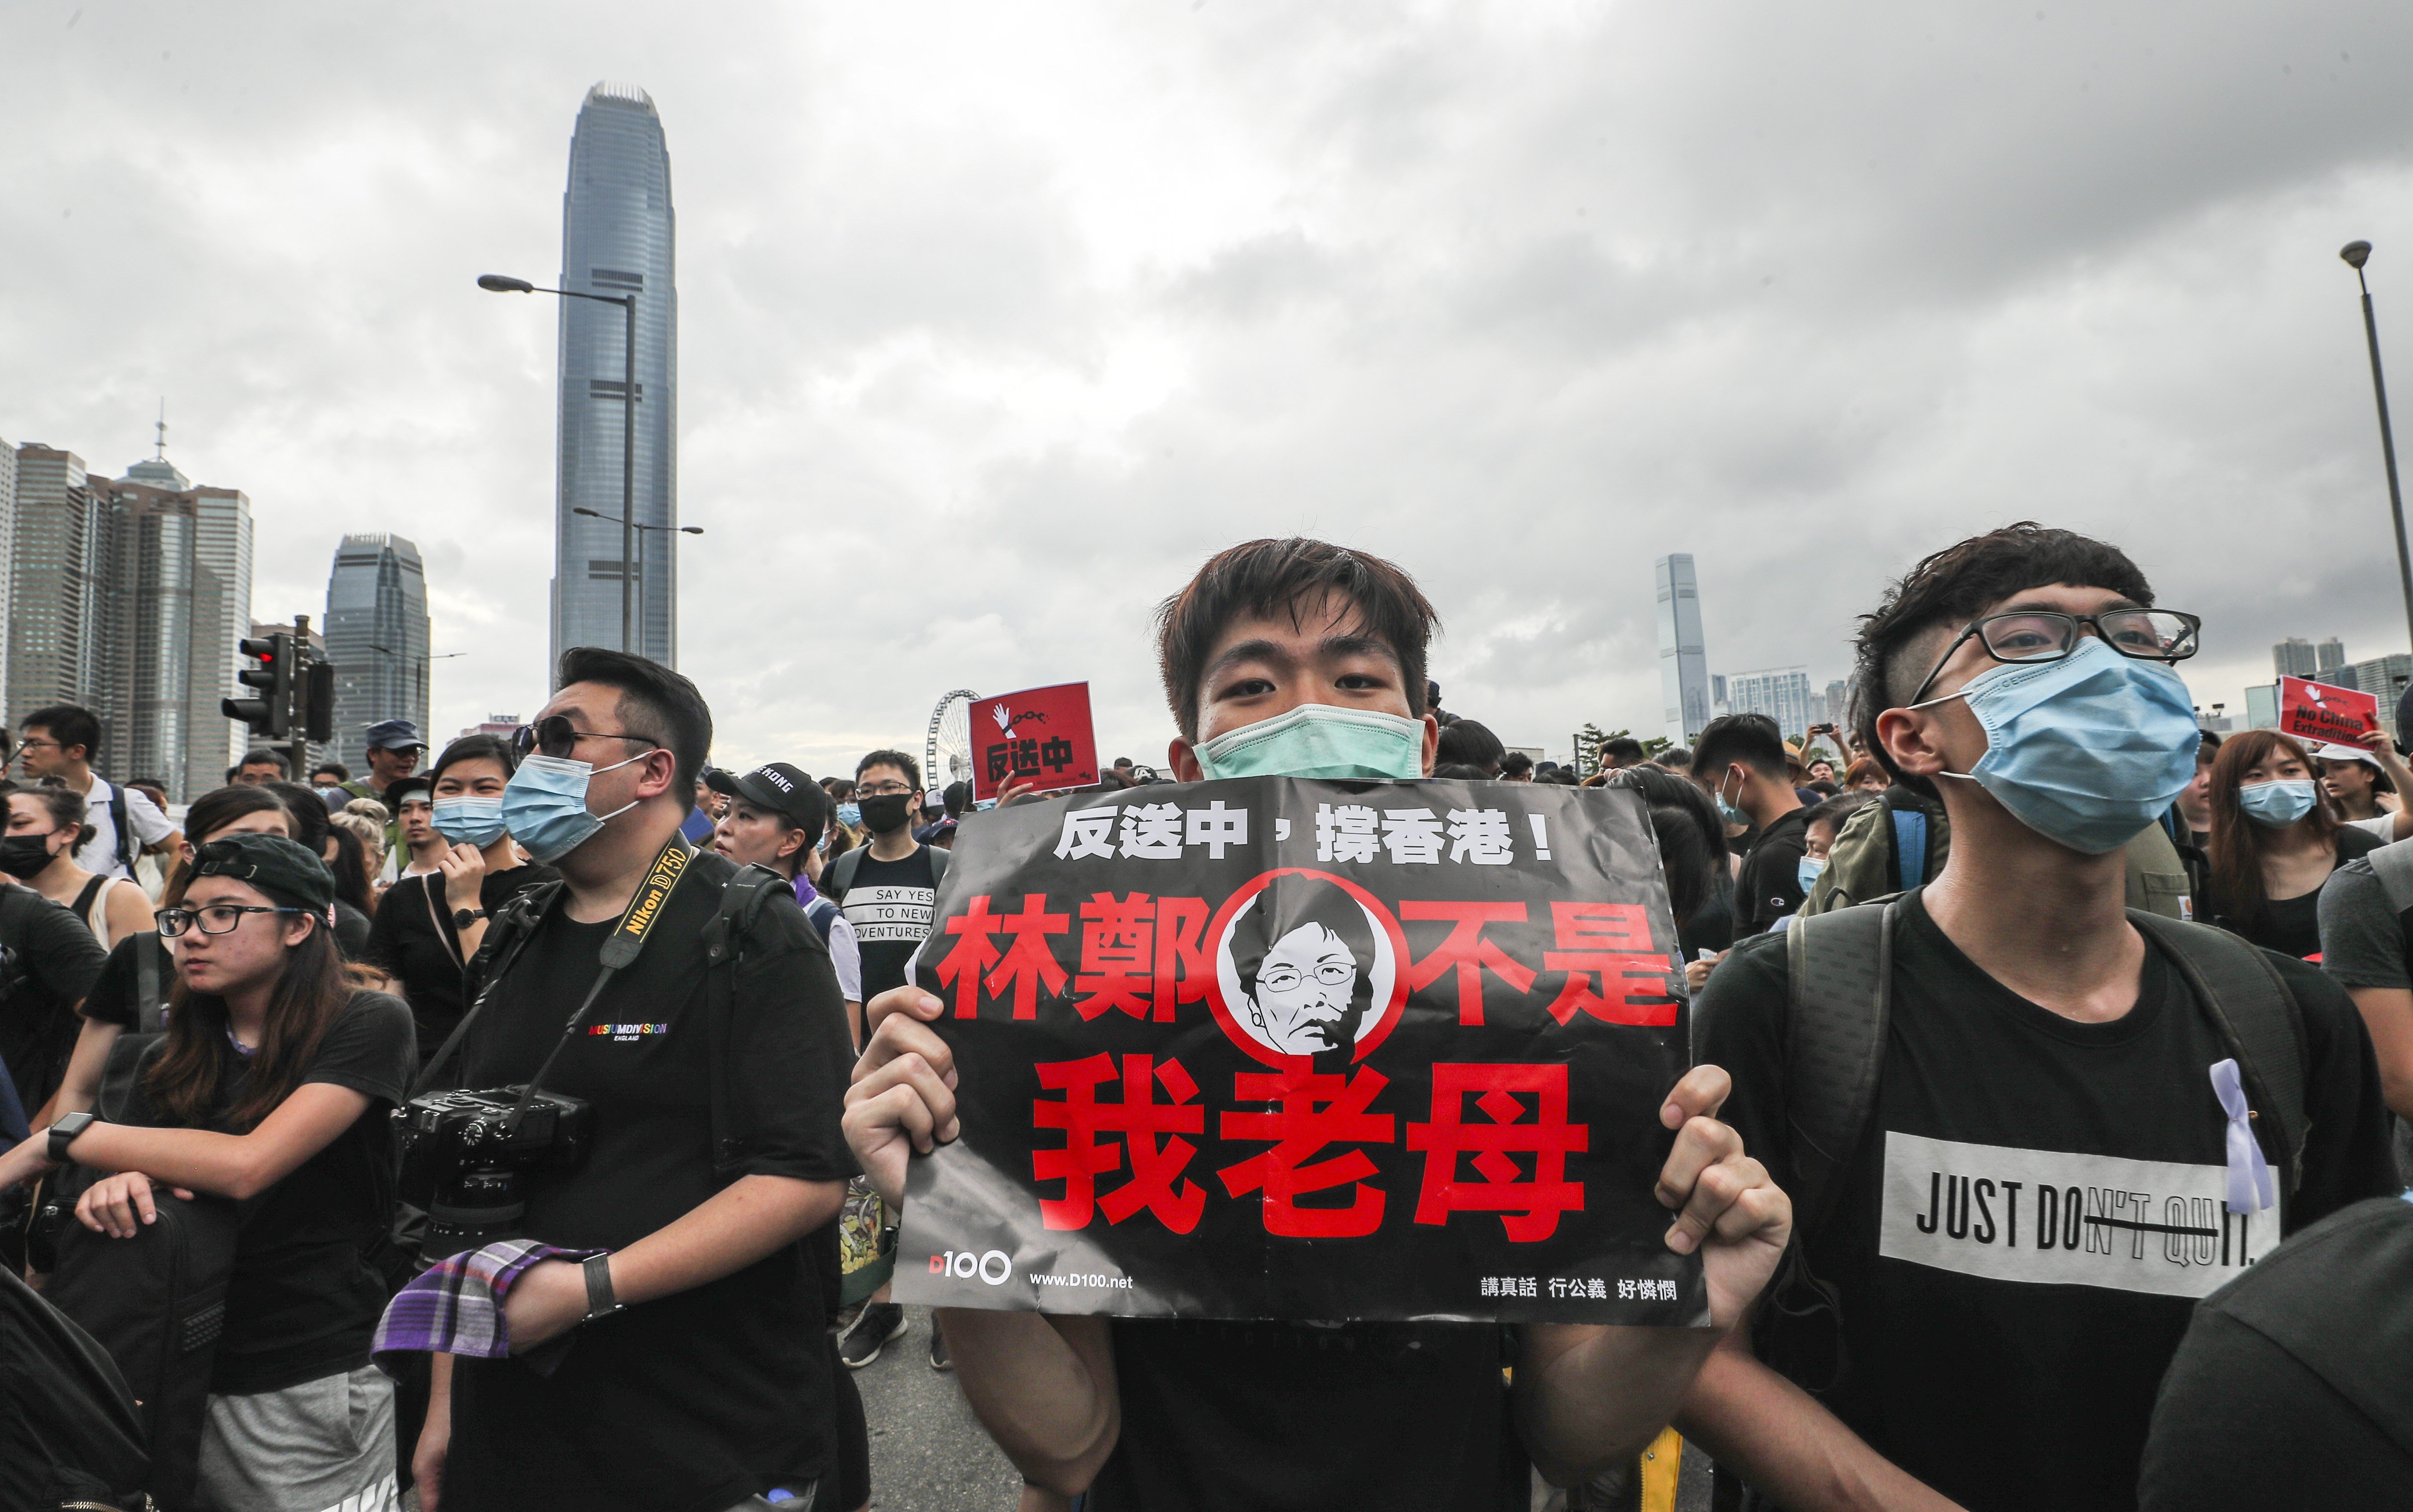 Protesters outside government headquarters in Tamar call for the withdrawal of the extradition bill and city leader Carrie Lam to resign. Photo: Sam Tsang